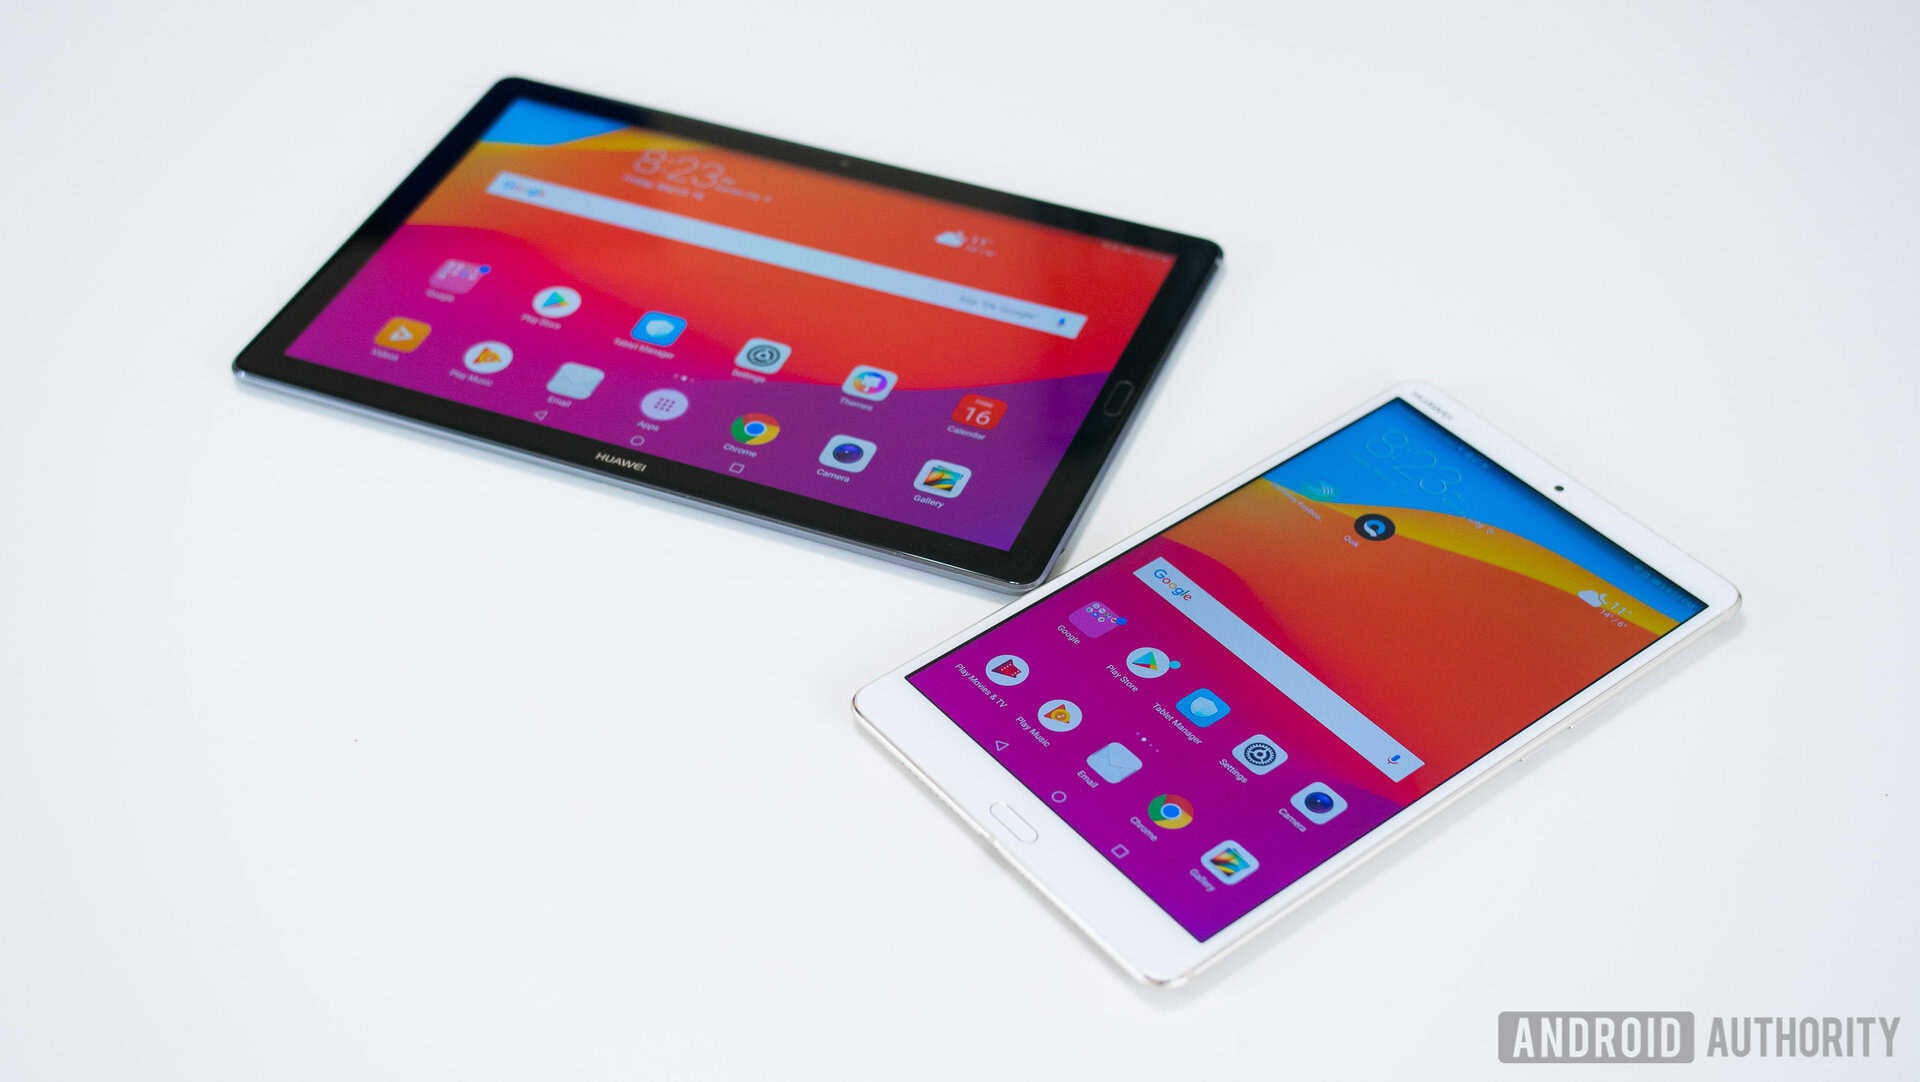 New High-End Android Tablets? Huawei MediaPad M5 gets Kirin 960